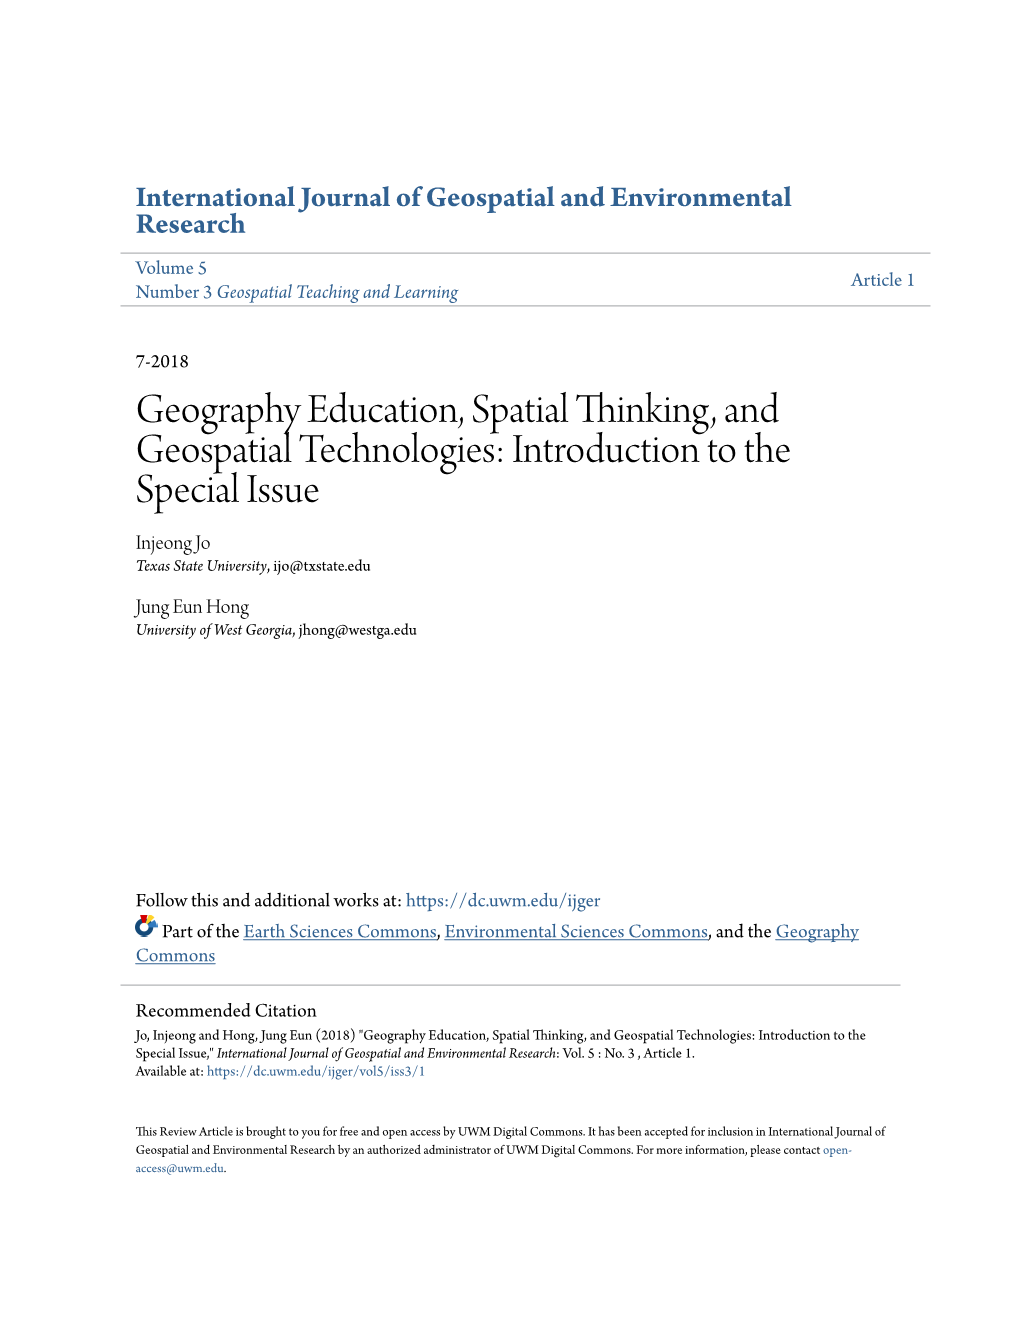 Geography Education, Spatial Thinking, and Geospatial Technologies: Introduction to the Special Issue Injeong Jo Texas State University, Ijo@Txstate.Edu